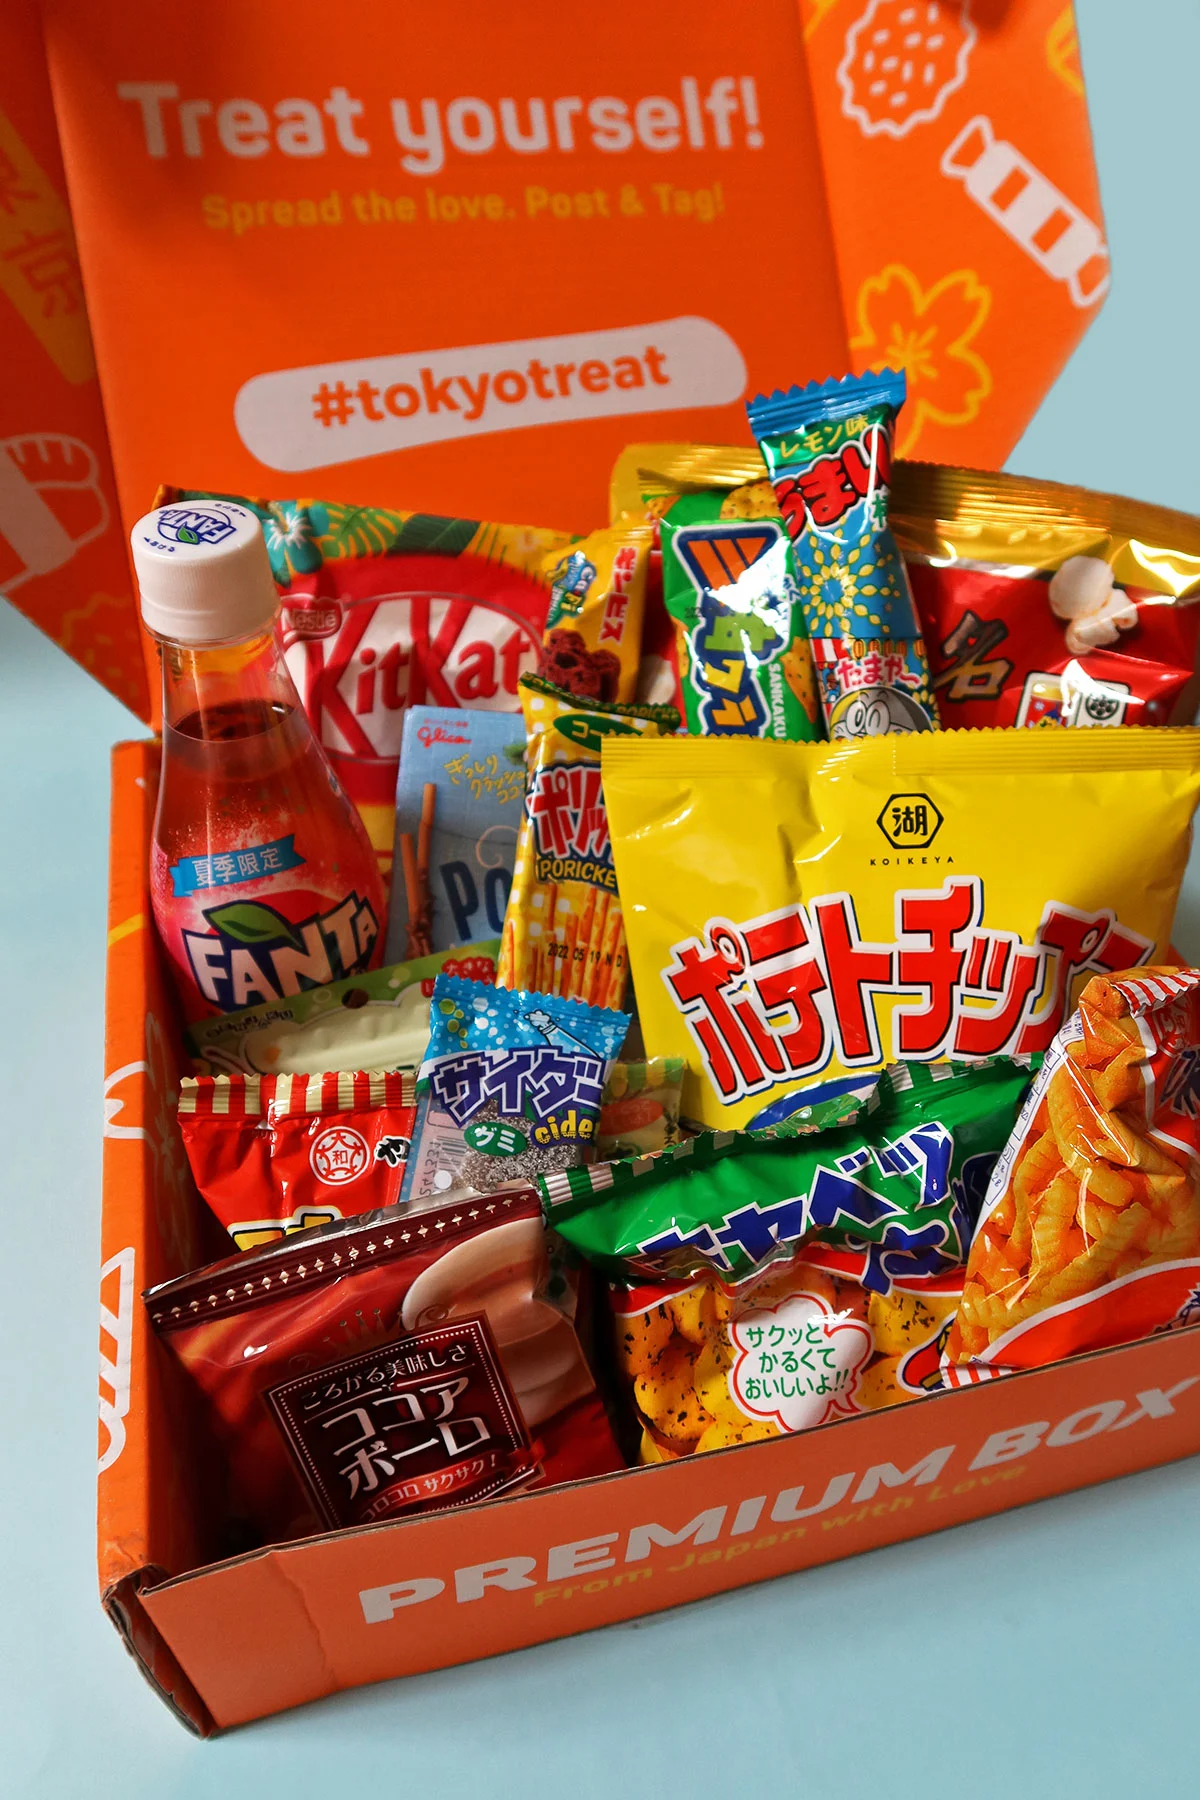 TokyoTreat's signature orange box loaded with Kit Kat bars, snack chips, party pack candies, drinks, DIY kits, etc